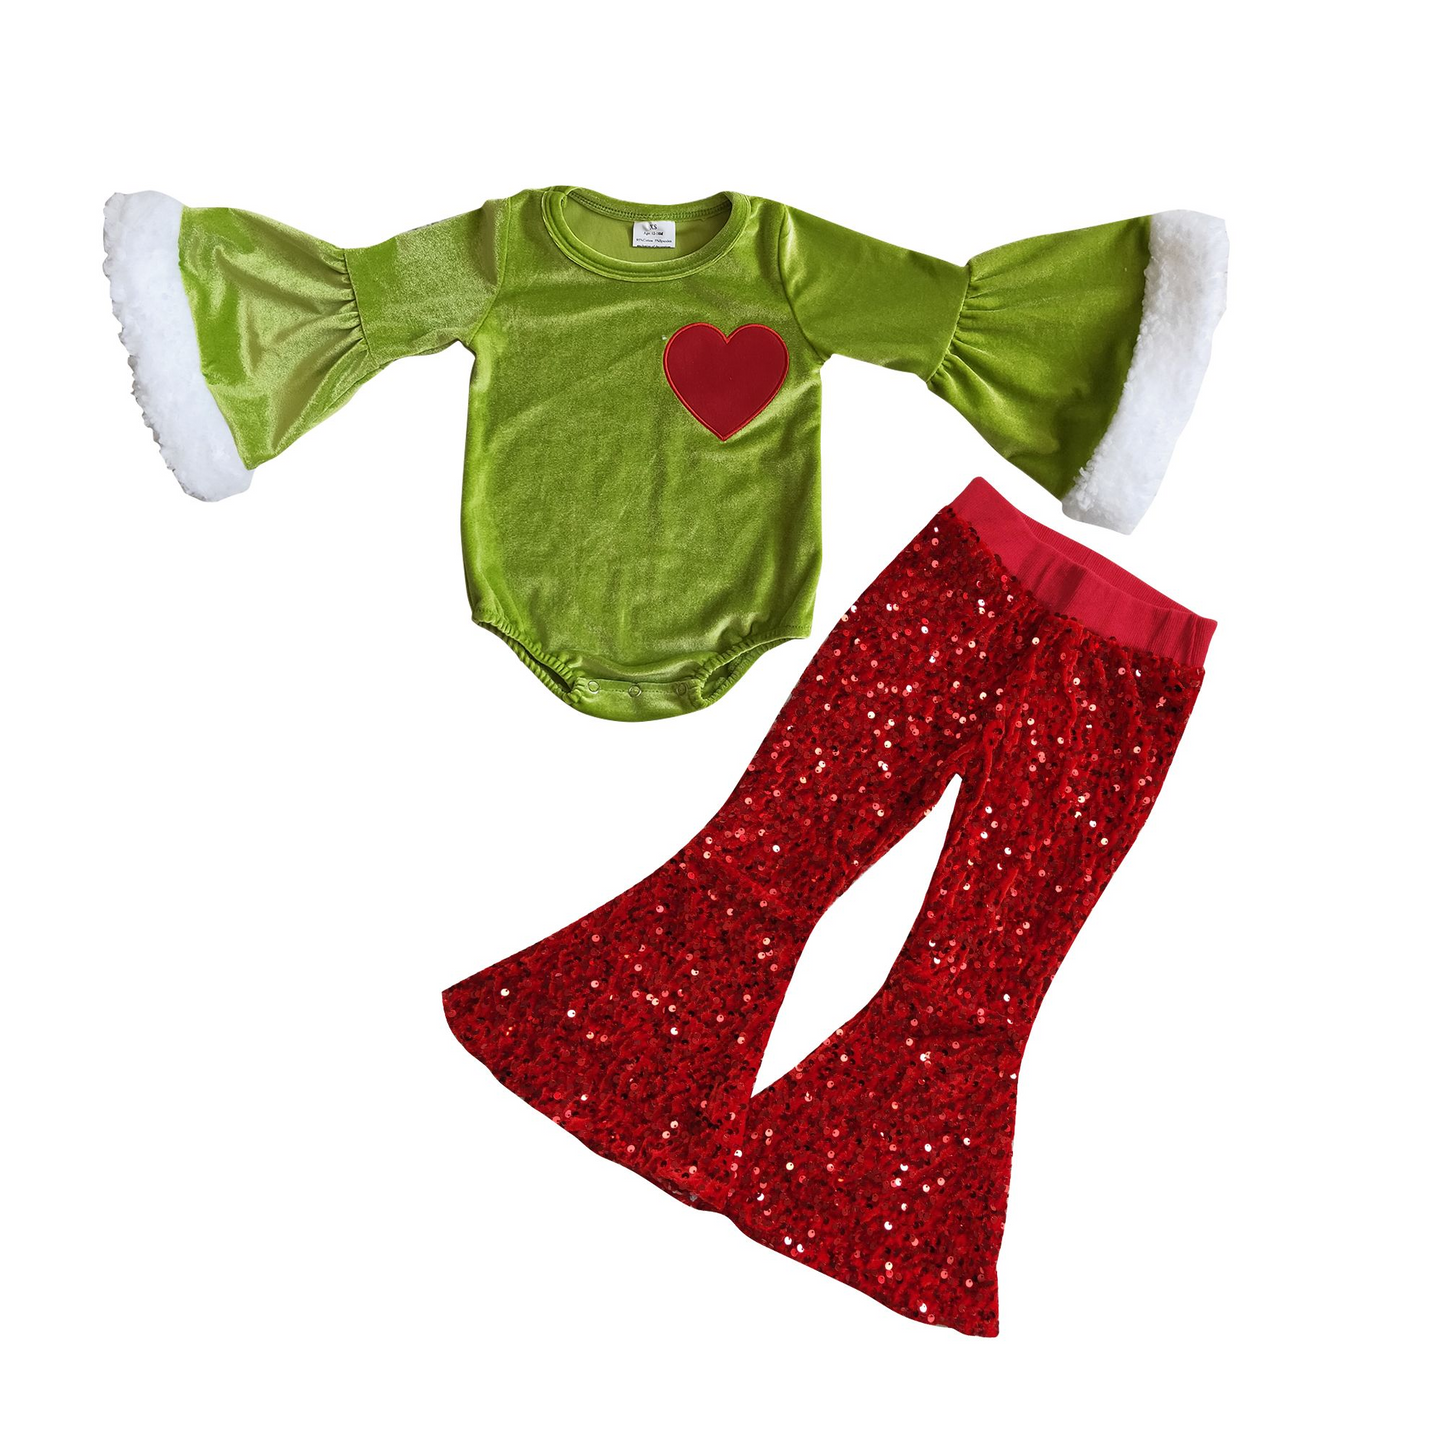 Heart embroidery green face romper 6 A4-4 red sequin pants B4-11 girls Christmas outfits